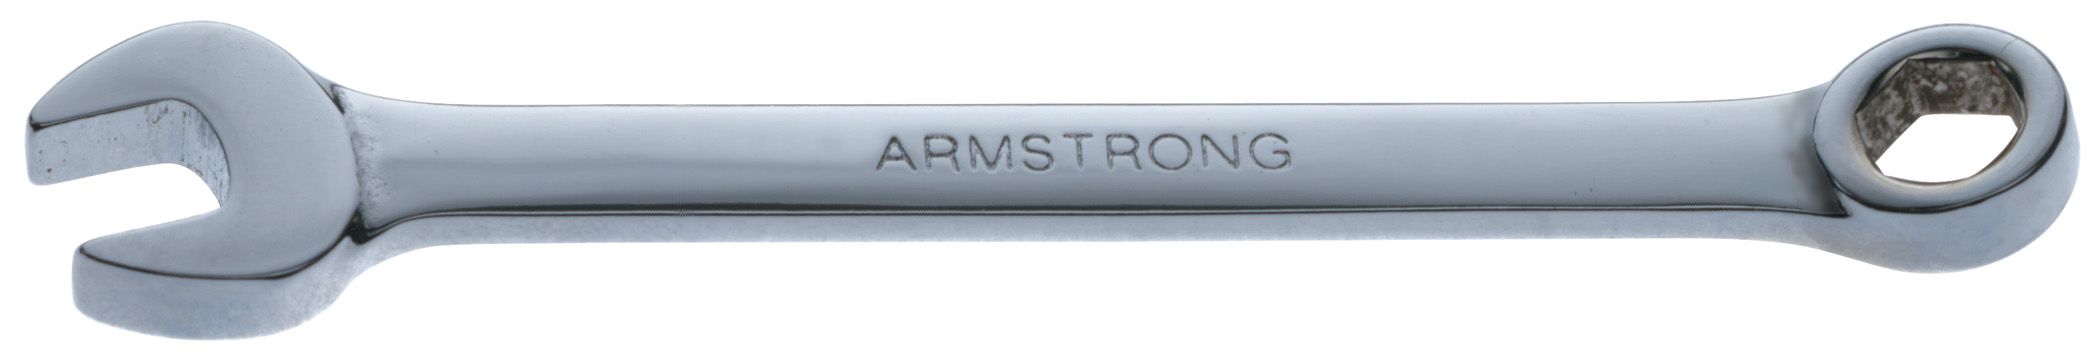 Armstrong 7 mm 6 pt. Full Polish Short Combination Wrench